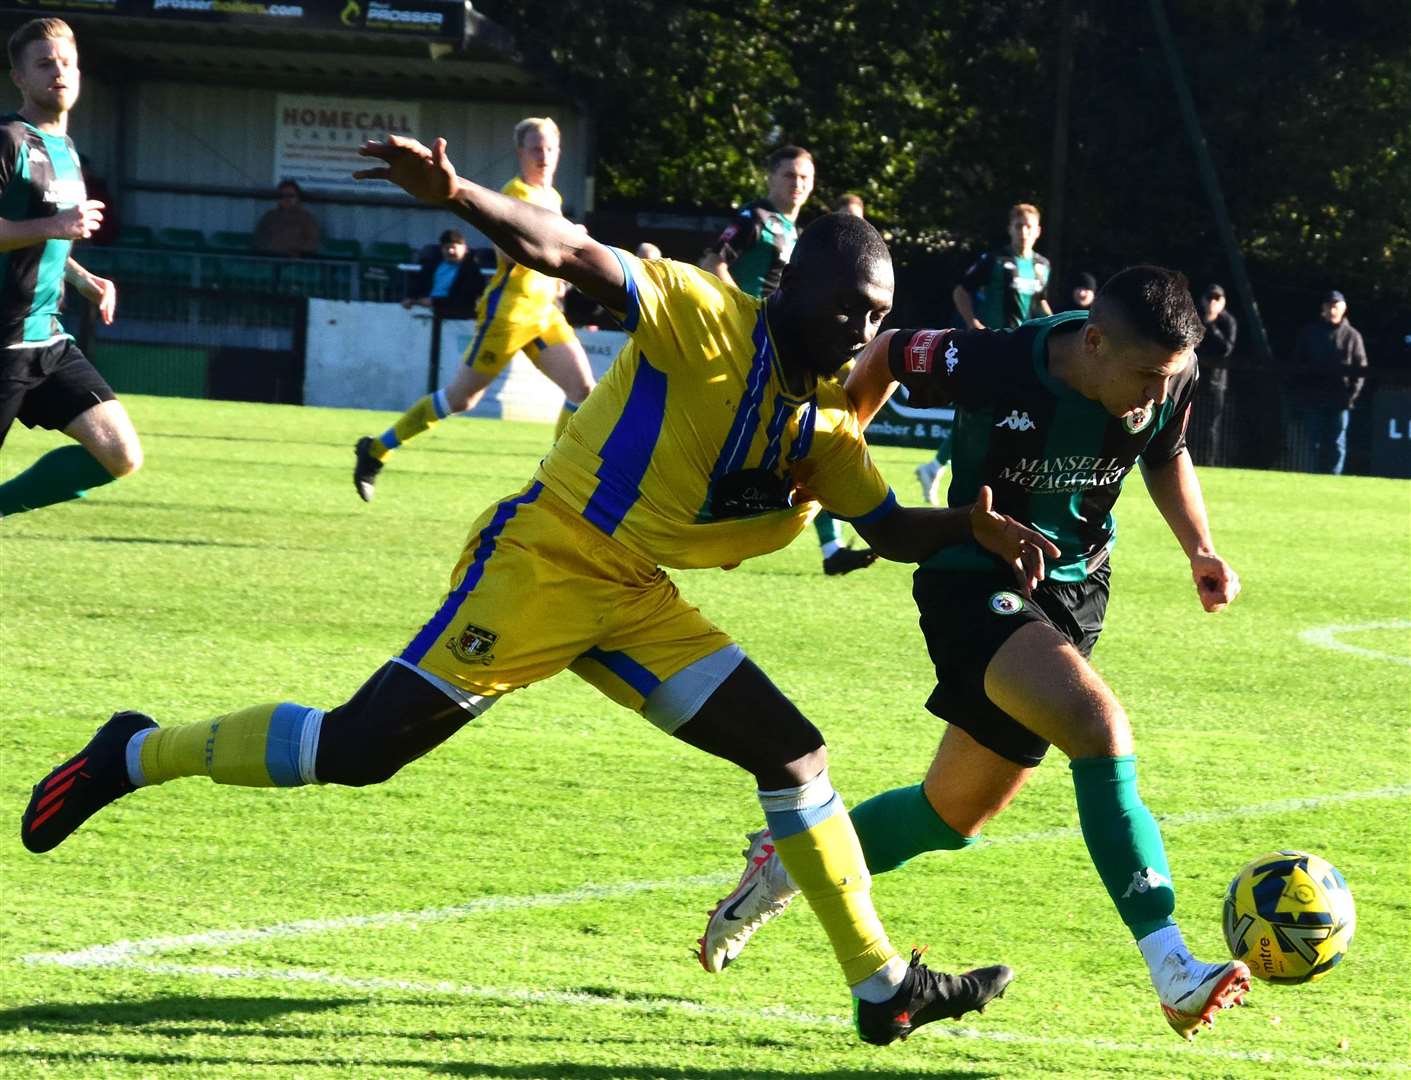 Sittingbourne battle for possession at Burgess Hill on Saturday. Picture: Phil Dennett